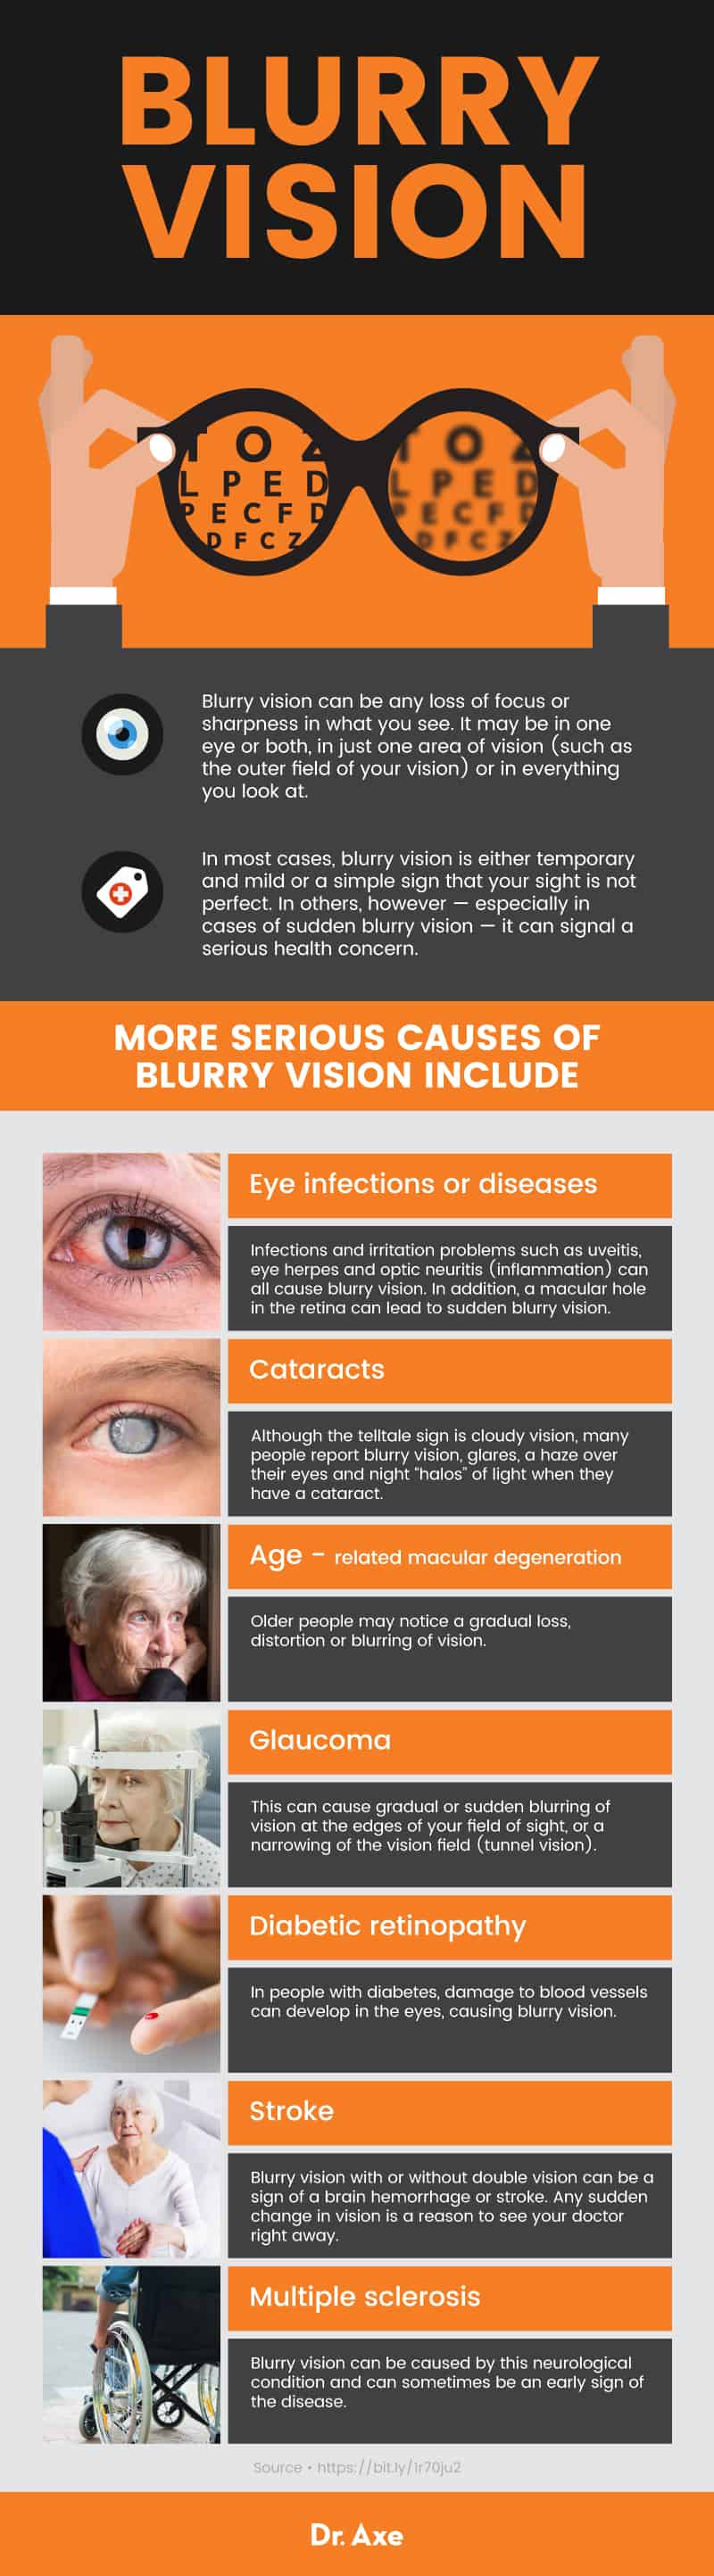 What causes blurry vision? - Dr. Axe